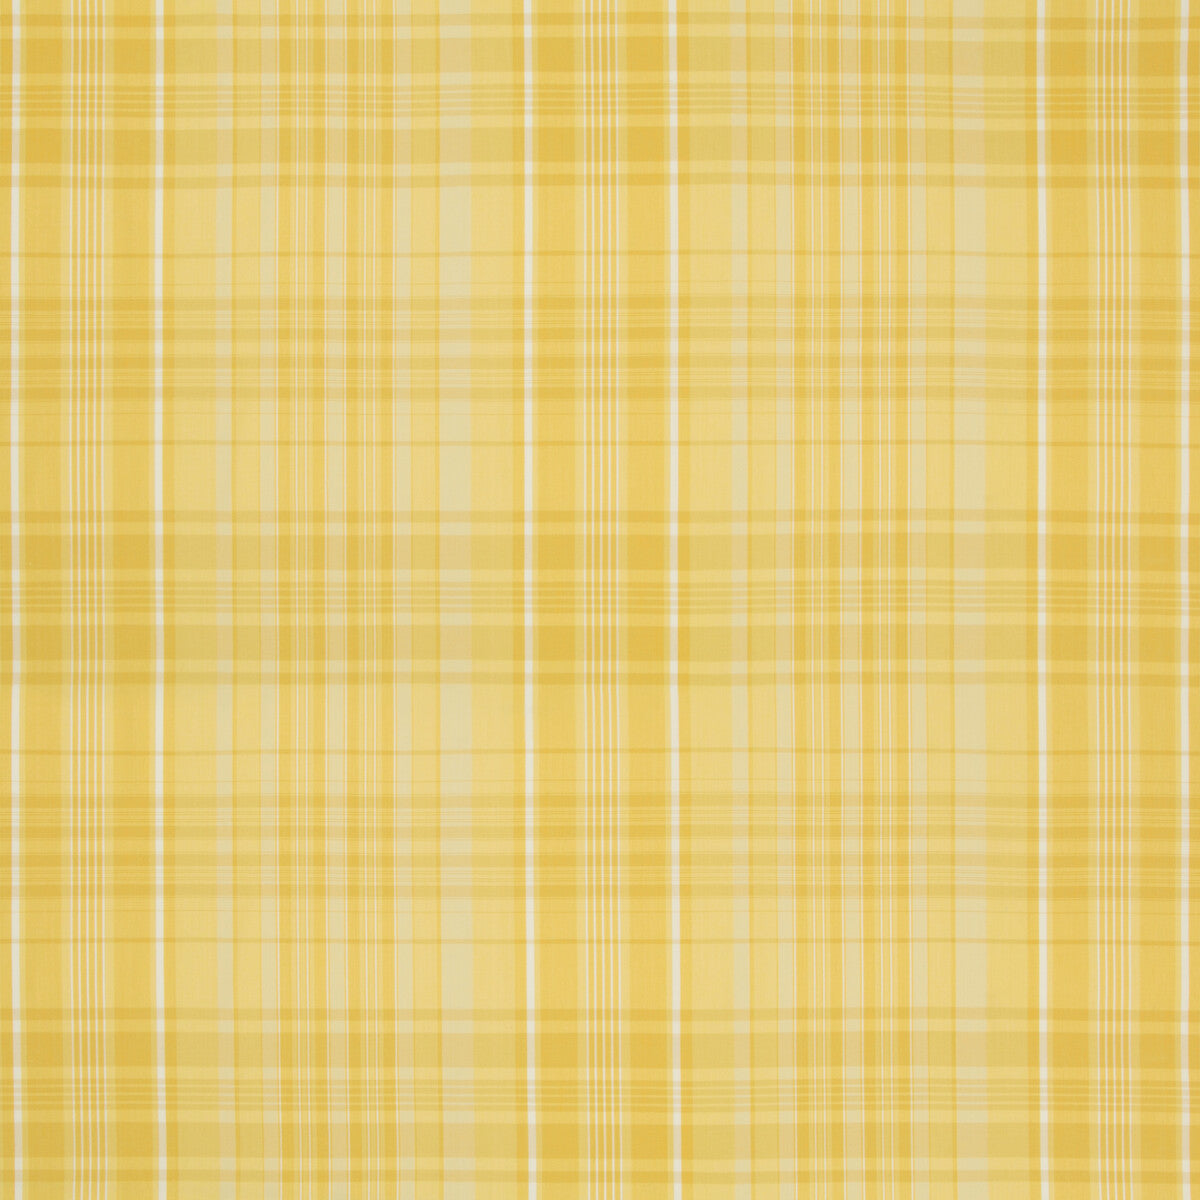 Guernsey Check fabric in yellow color - pattern 8019101.40.0 - by Brunschwig &amp; Fils in the Normant Checks And Stripes collection